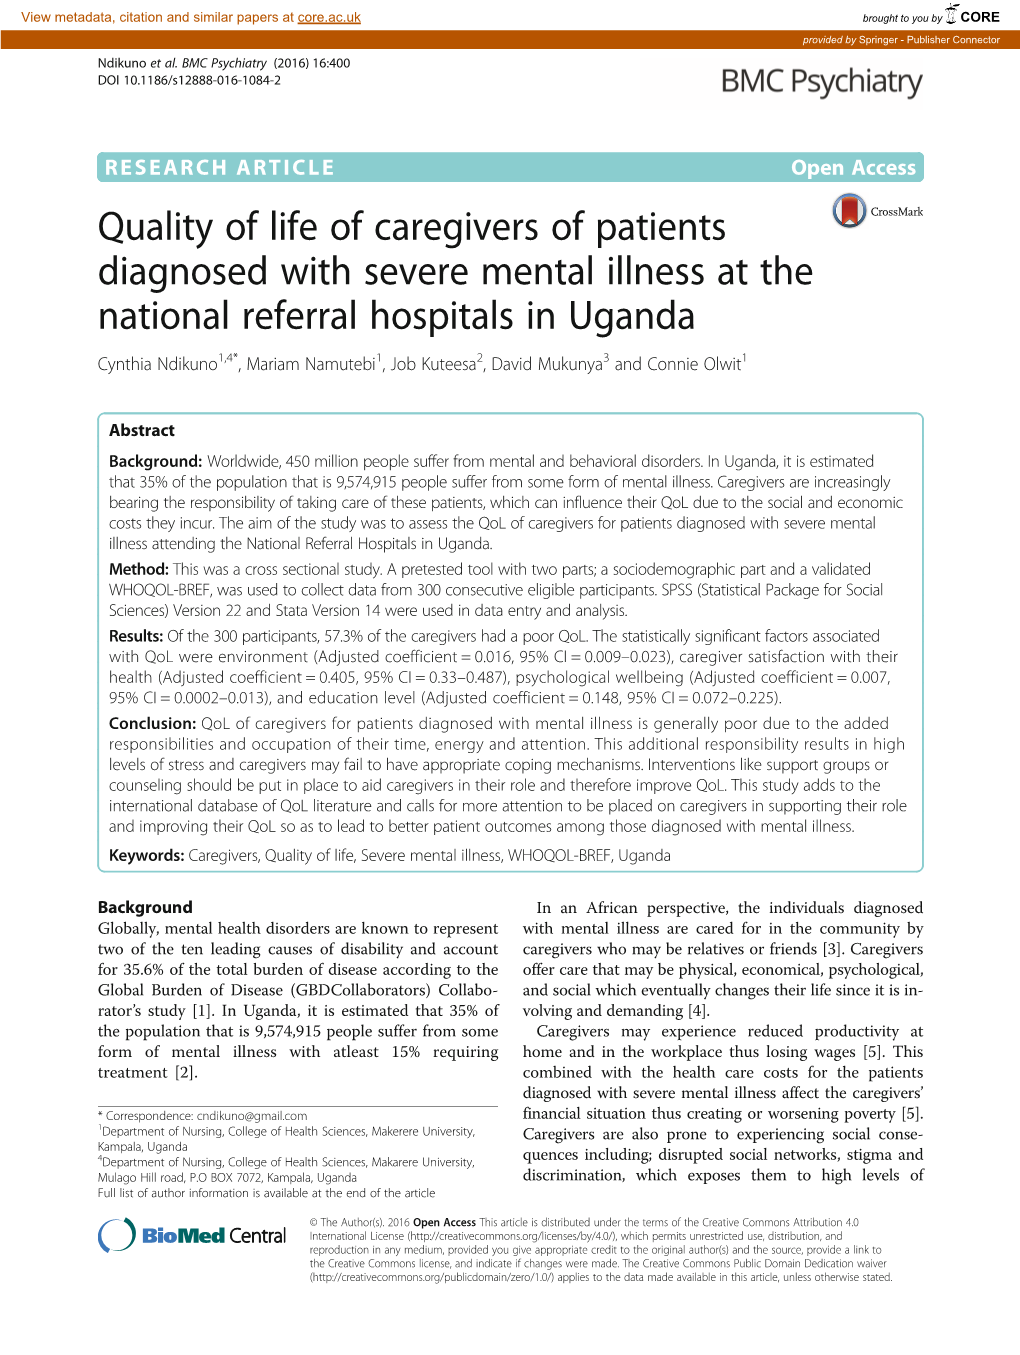 Quality of Life of Caregivers of Patients Diagnosed with Severe